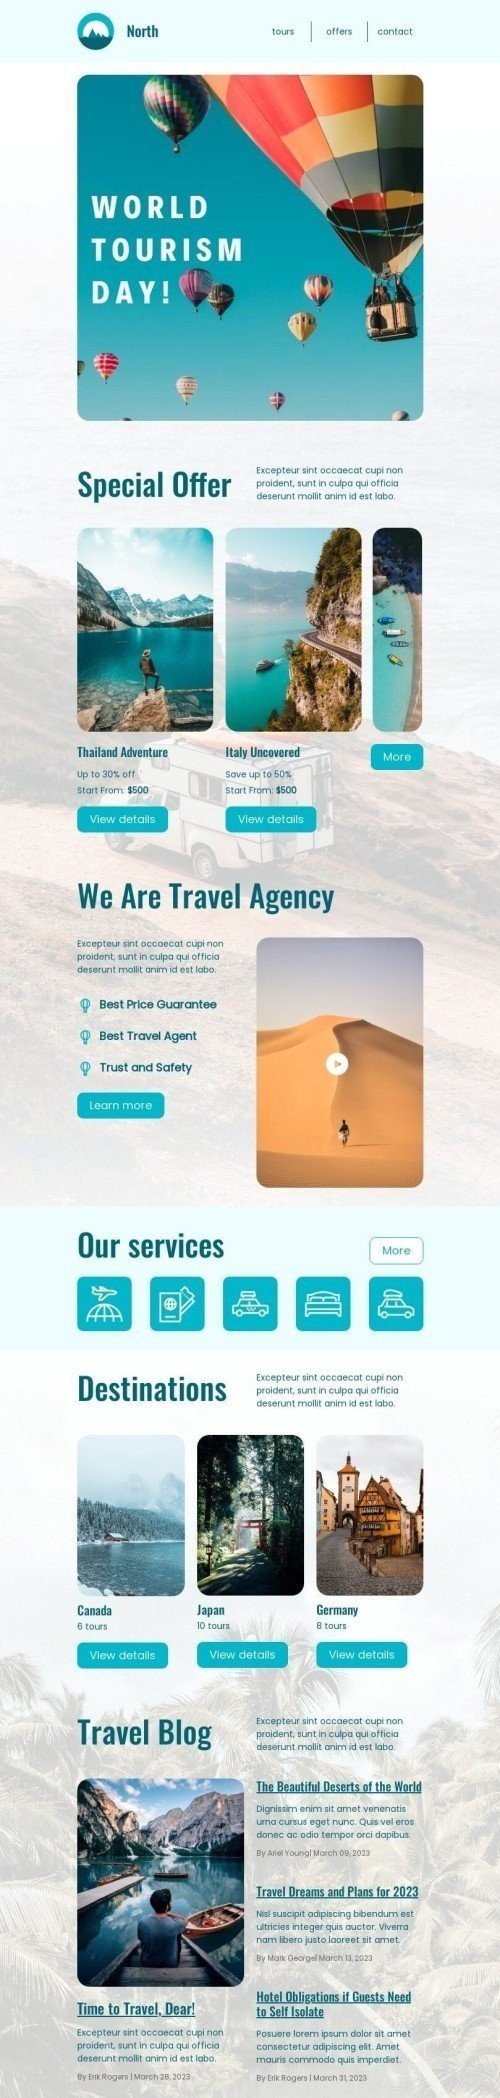 World Tourism Day Email Template "Thailand Adventure" for Travel industry mobile view